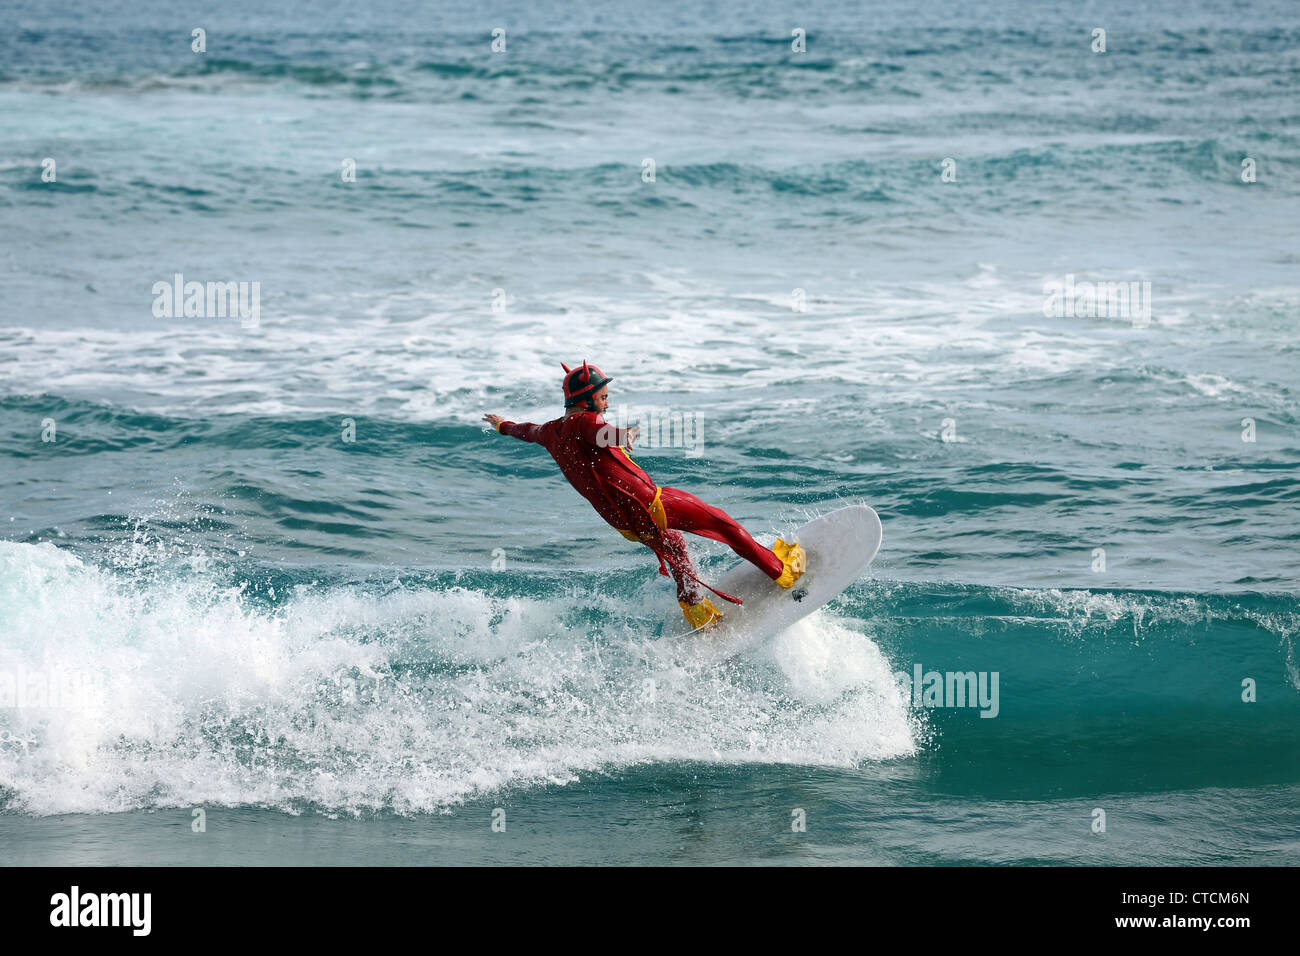 Bearded man surfing a wave wearing red superhero costume. Stock Photo